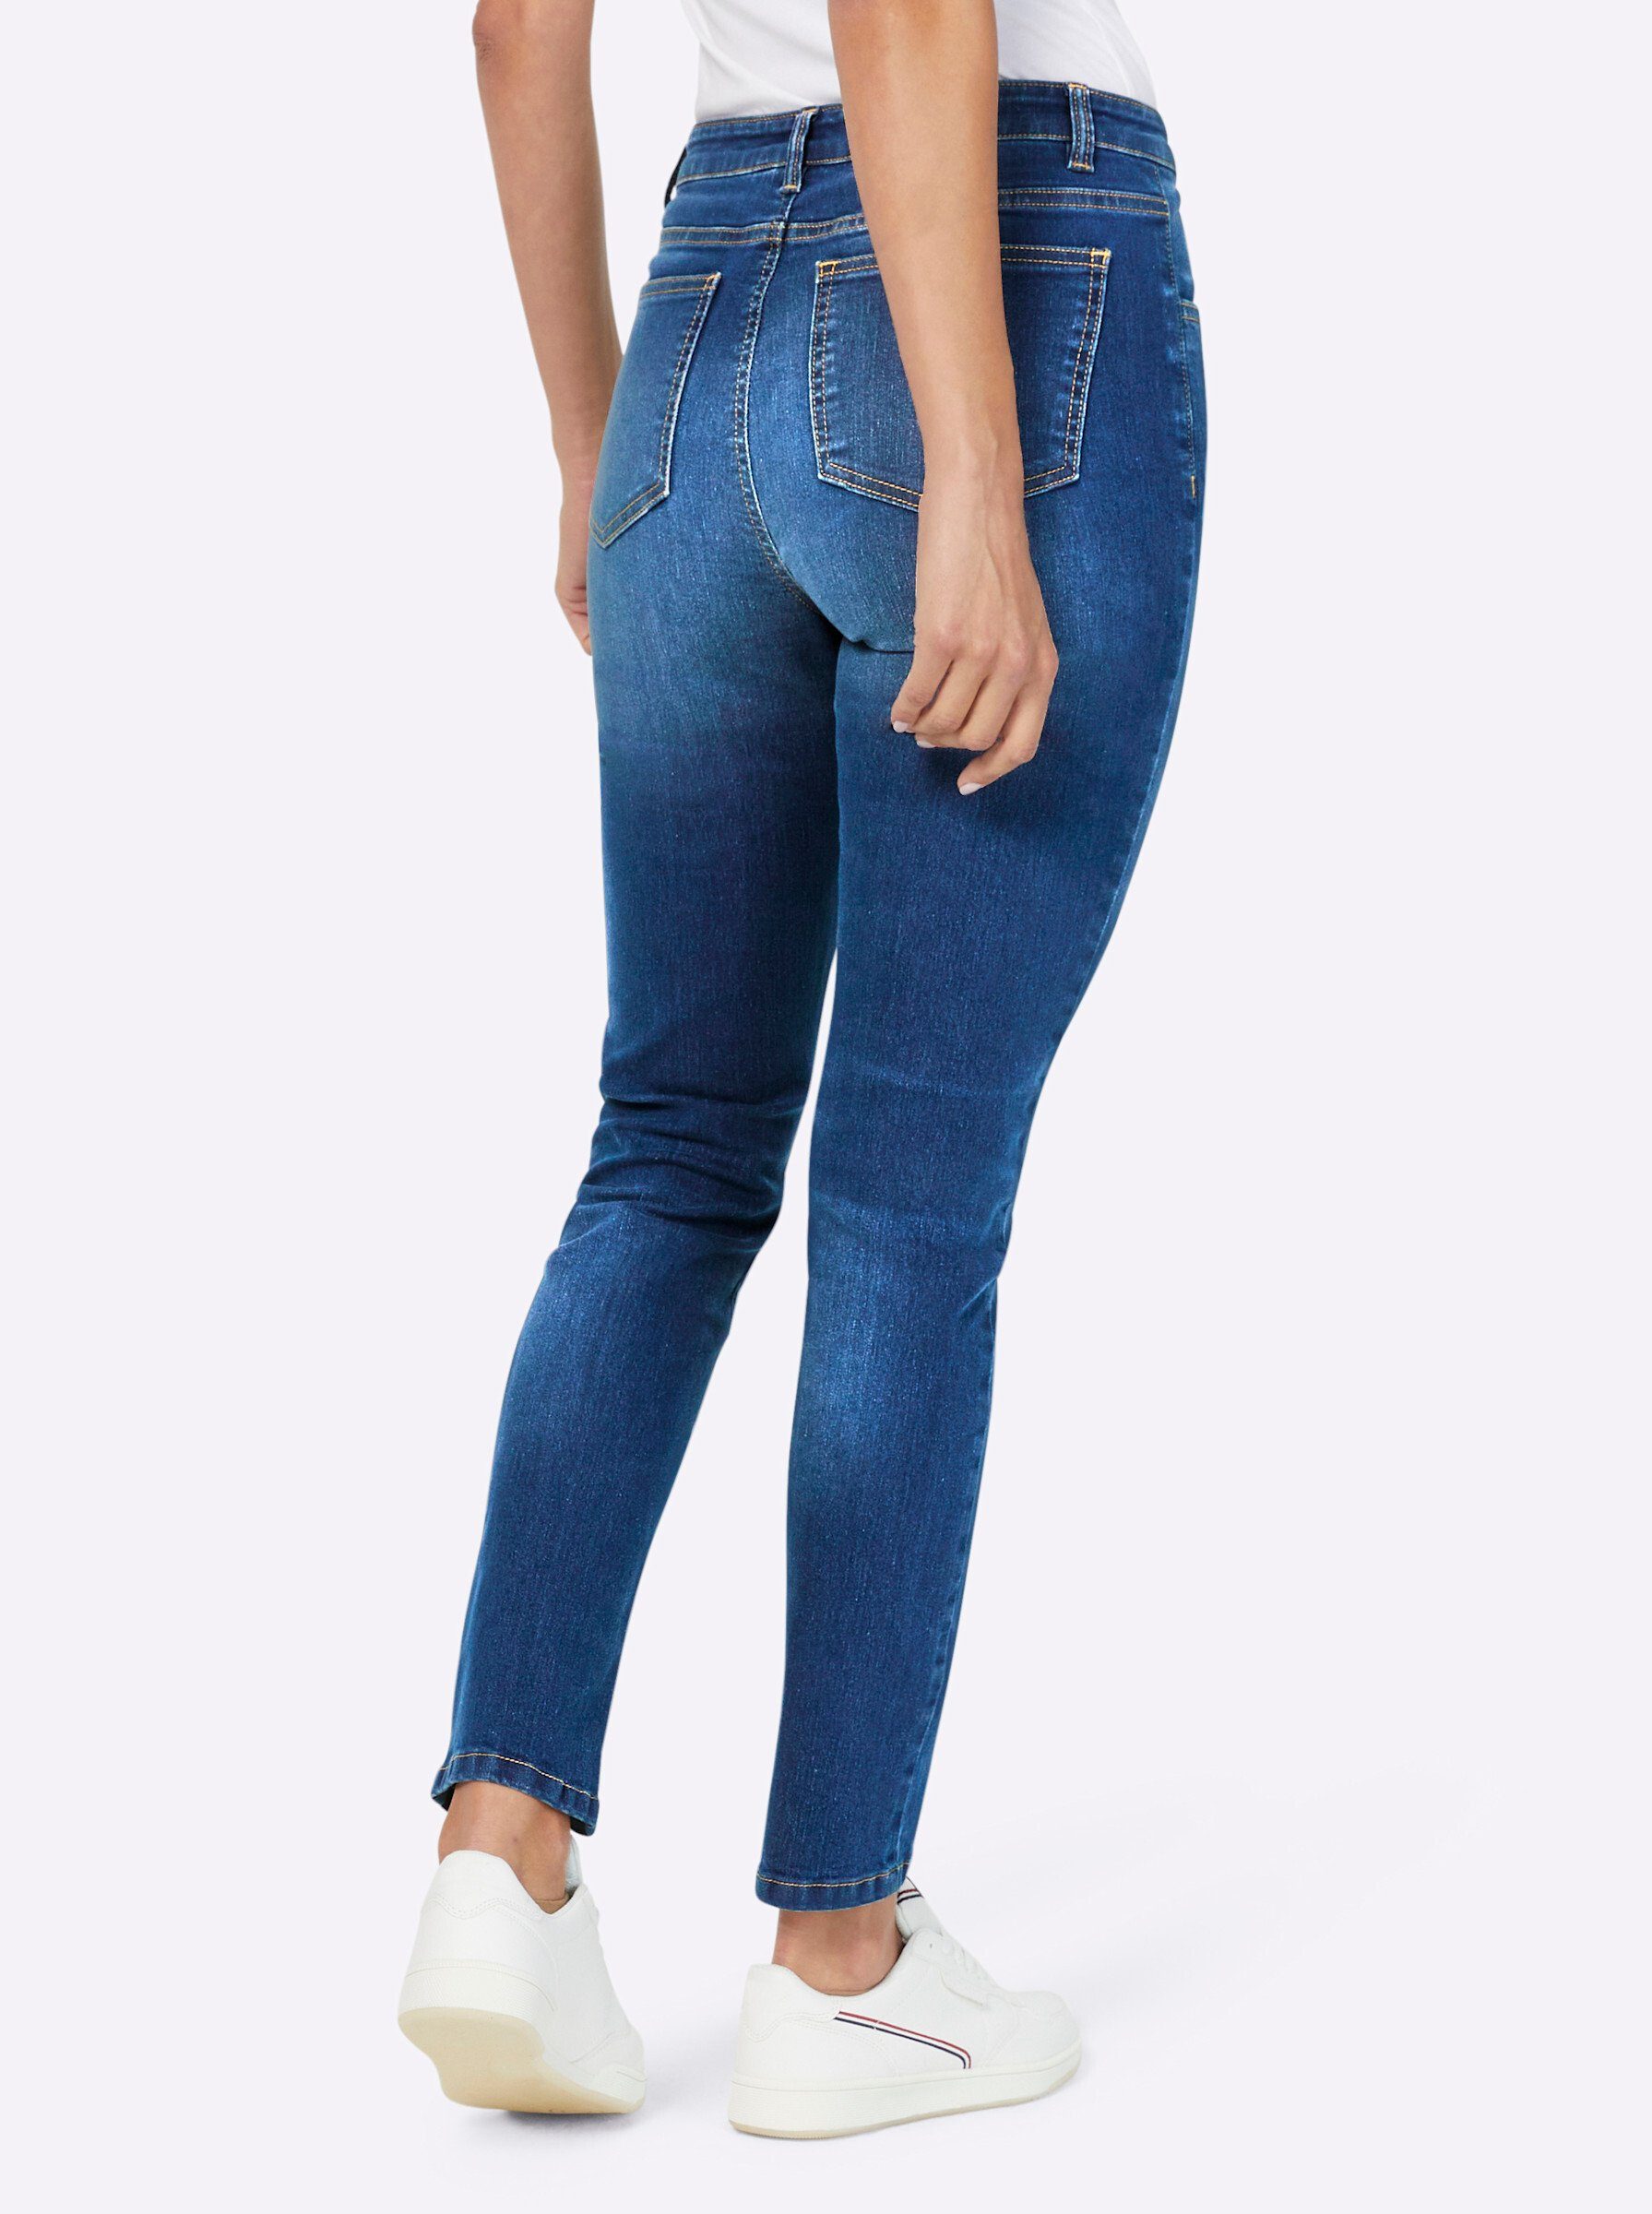 Jeans blue-stone-washed heine Bequeme